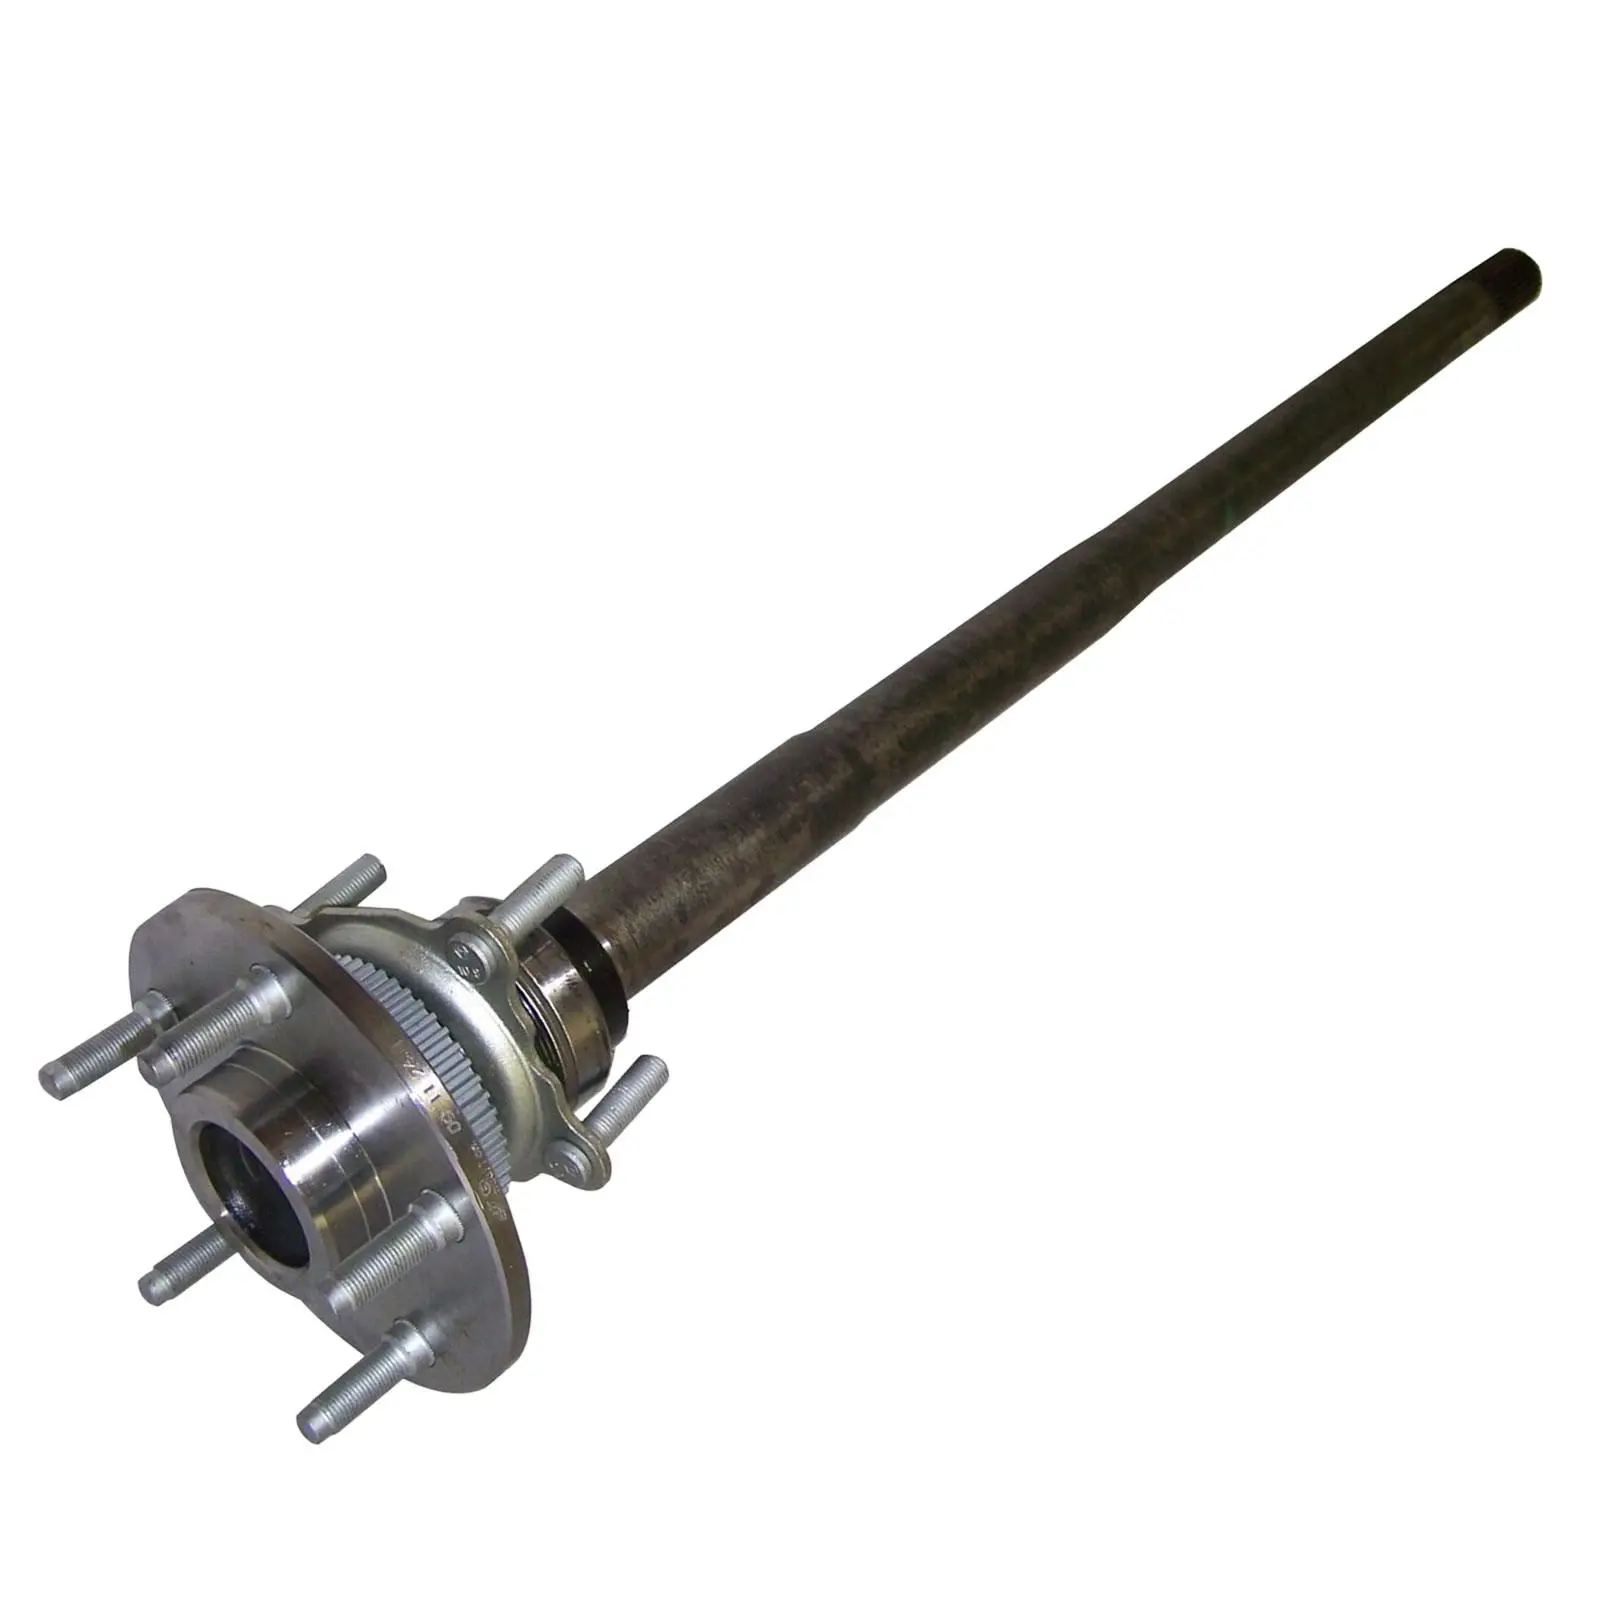 Axle Shaft 68003272AA Replacement Repair Parts for Jeep Wrangler JK Accessories Easily to Install Professional